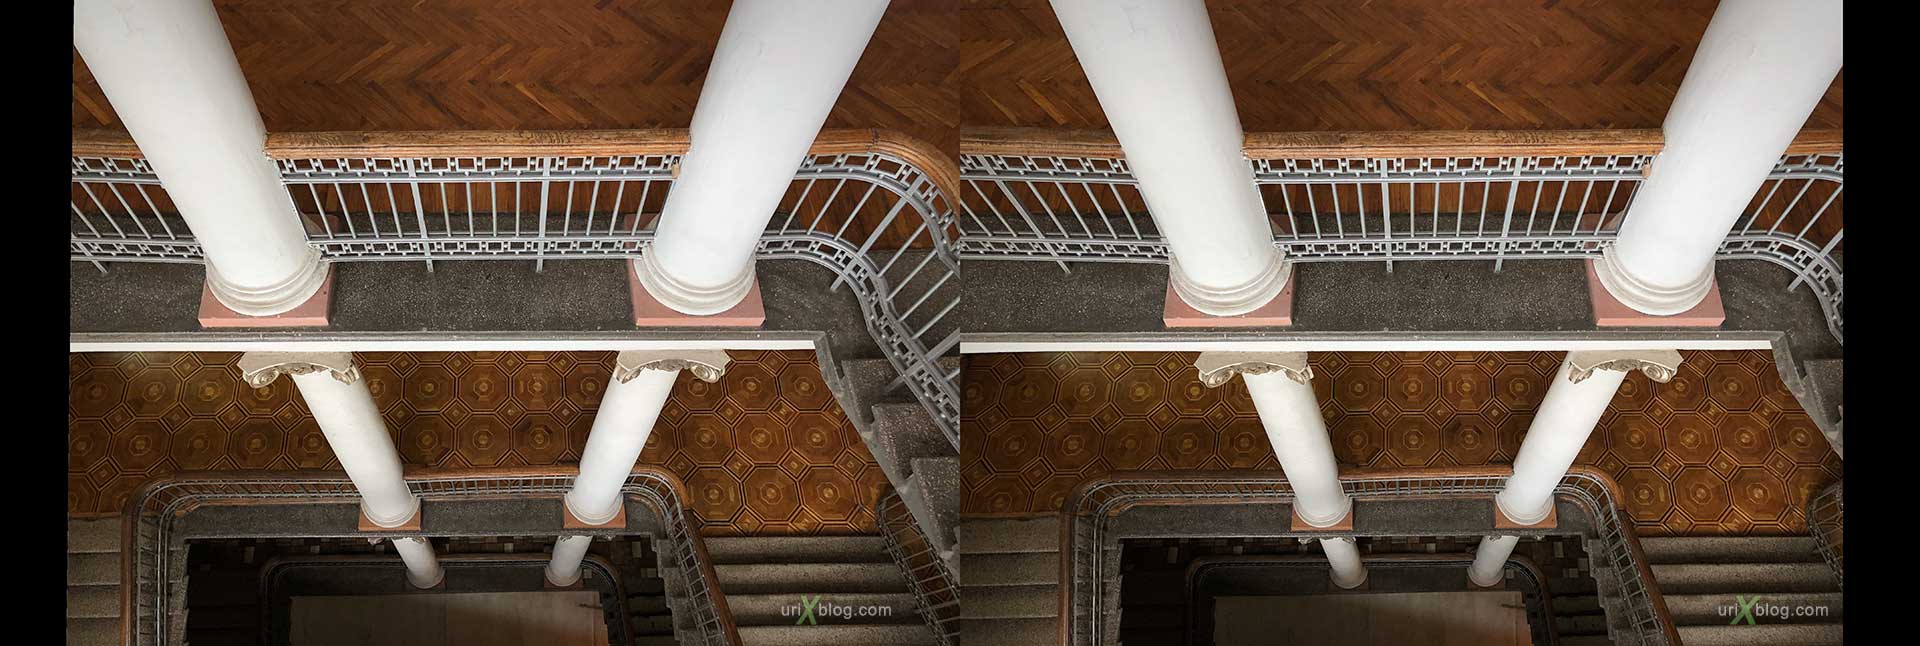 Staircase, building, stairs, Tverskaya 20, Moscow, Russia, architecture, 3D, stereo pair, cross-eyed, crossview, cross view stereo pair, stereoscopic